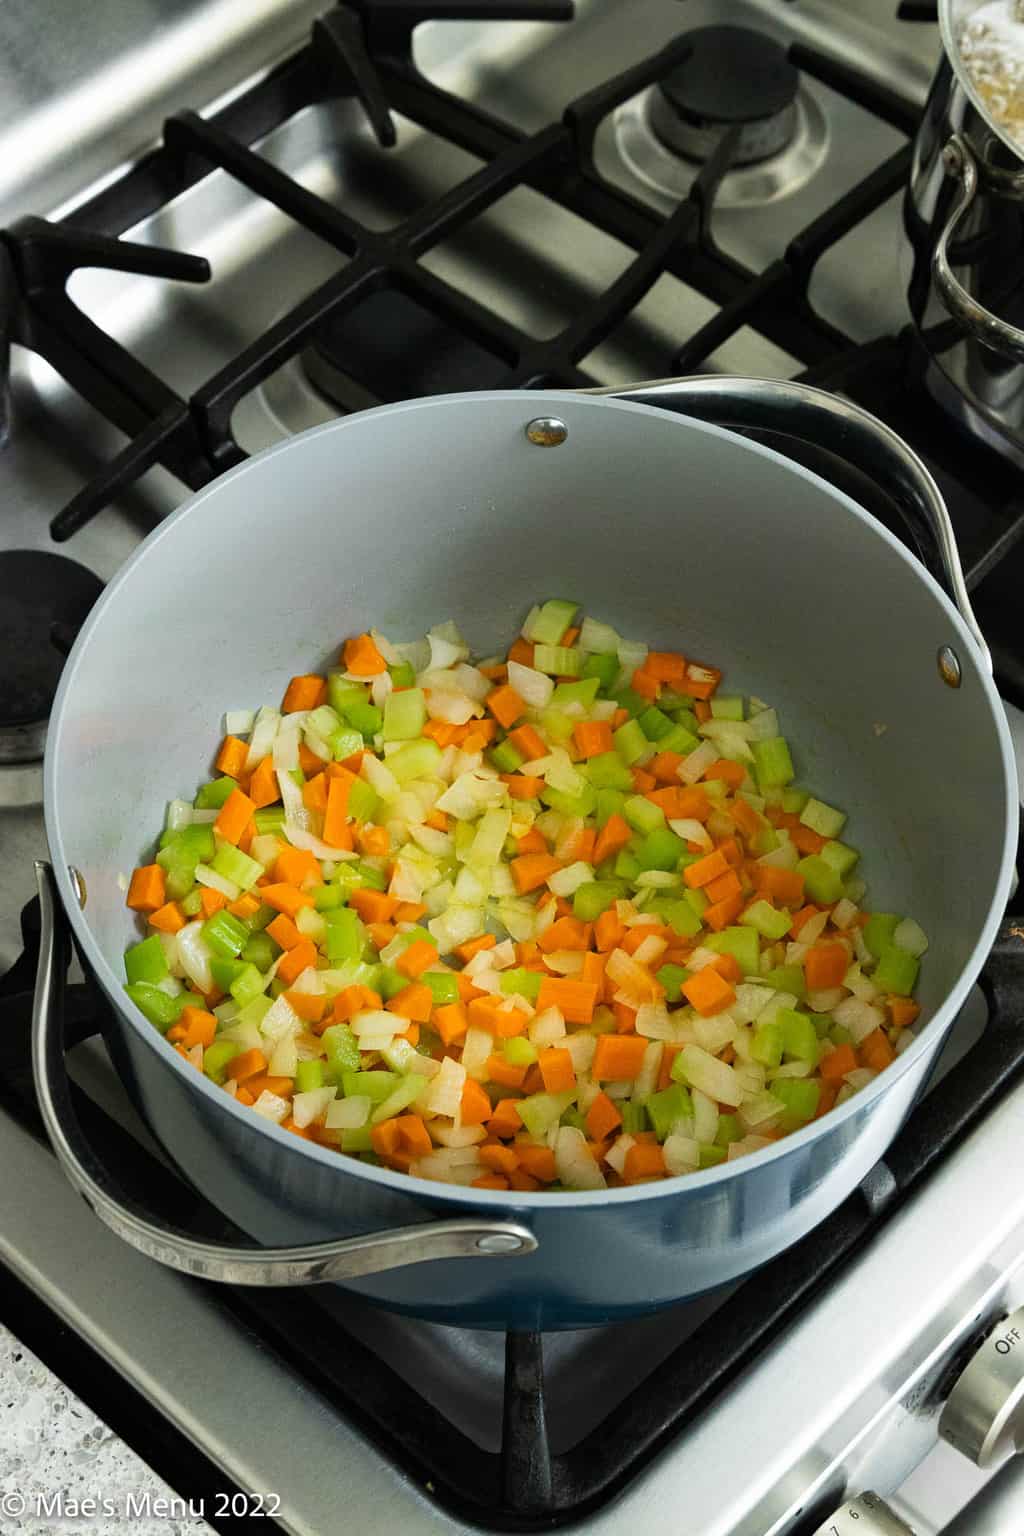 Sauteing onions, celery, and carrots in a stockpot on the oven.